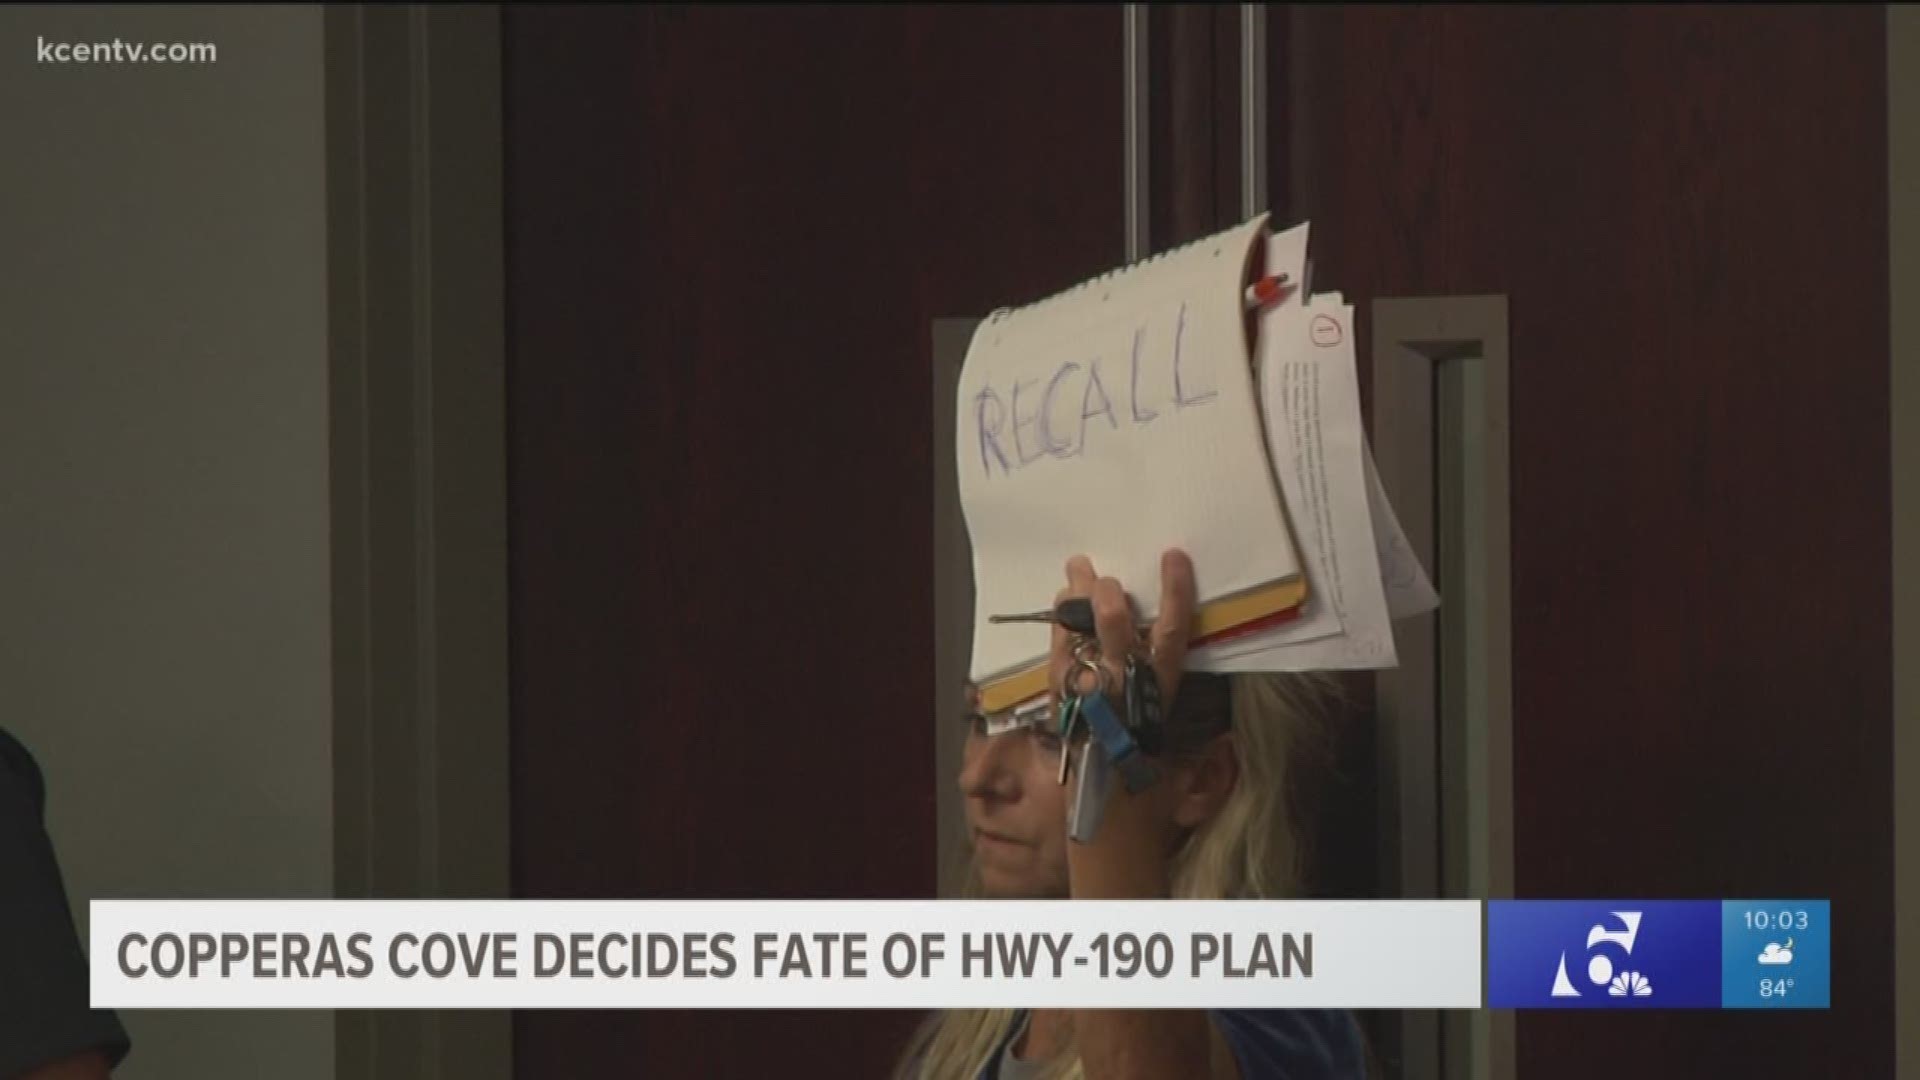 The Copperas Cove City Council approved a plan that will majorly change the road into the city.